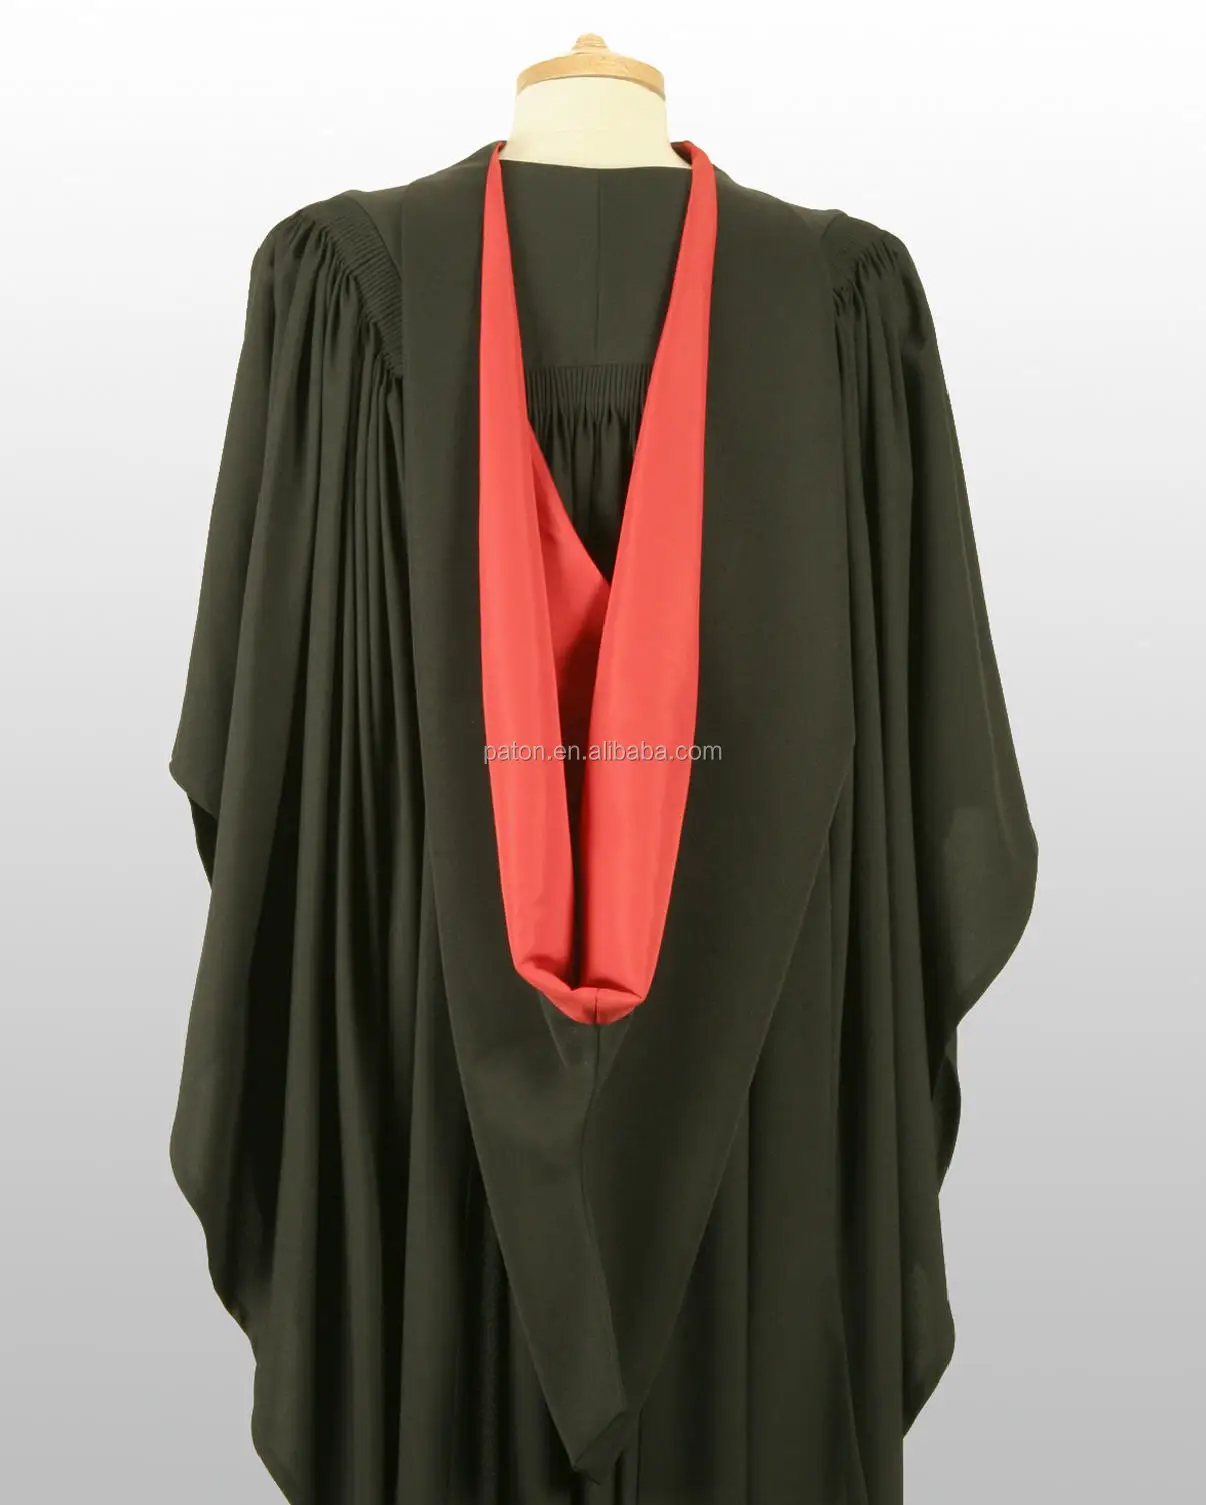 Cheap Price Fashionable Graduation Gowns For Academic Dress - Buy ...